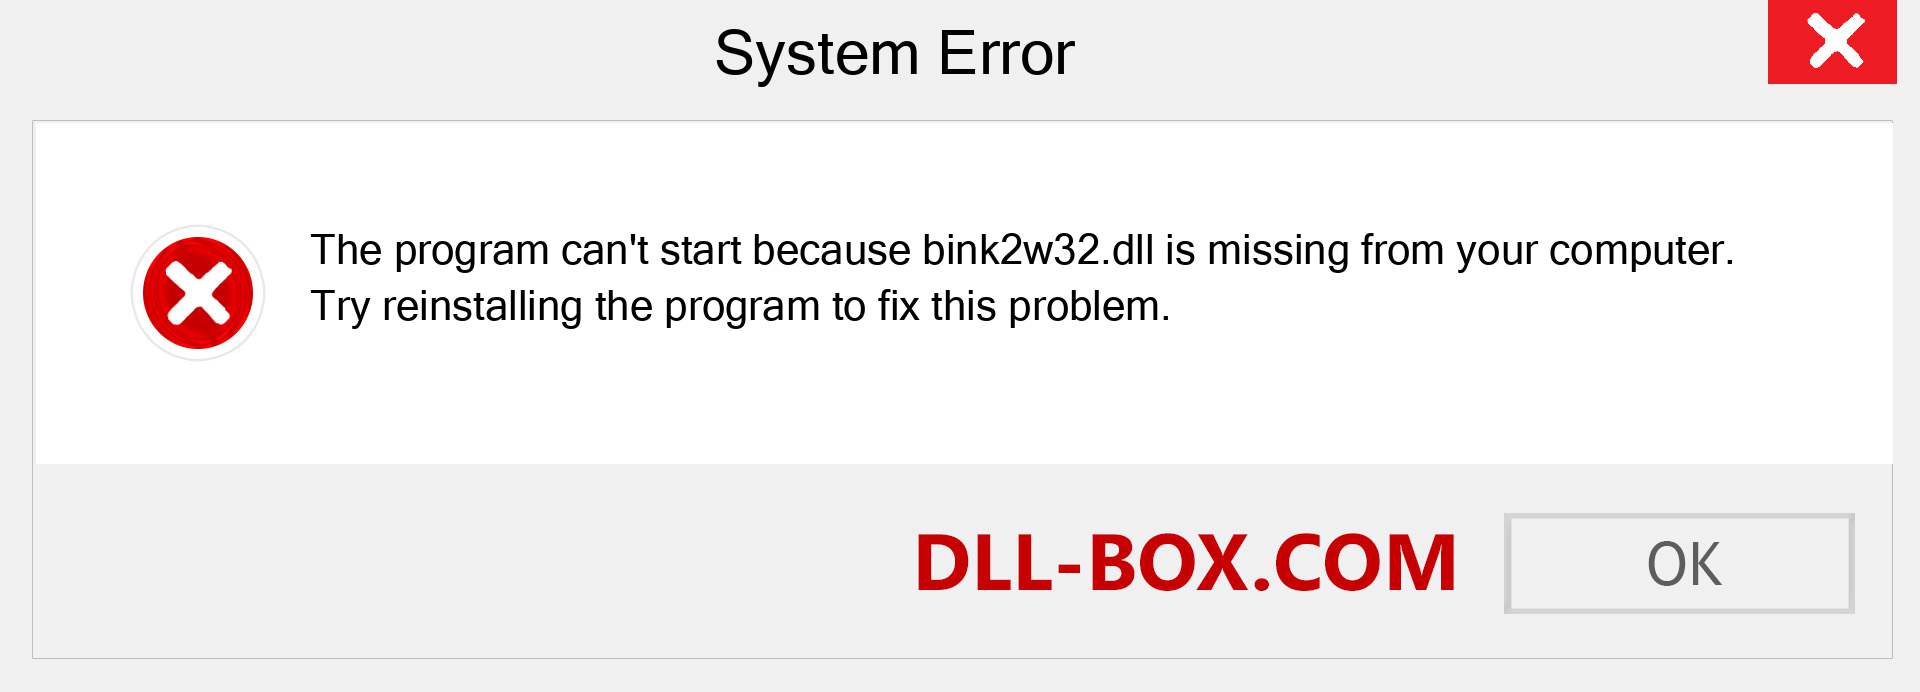  bink2w32.dll file is missing?. Download for Windows 7, 8, 10 - Fix  bink2w32 dll Missing Error on Windows, photos, images